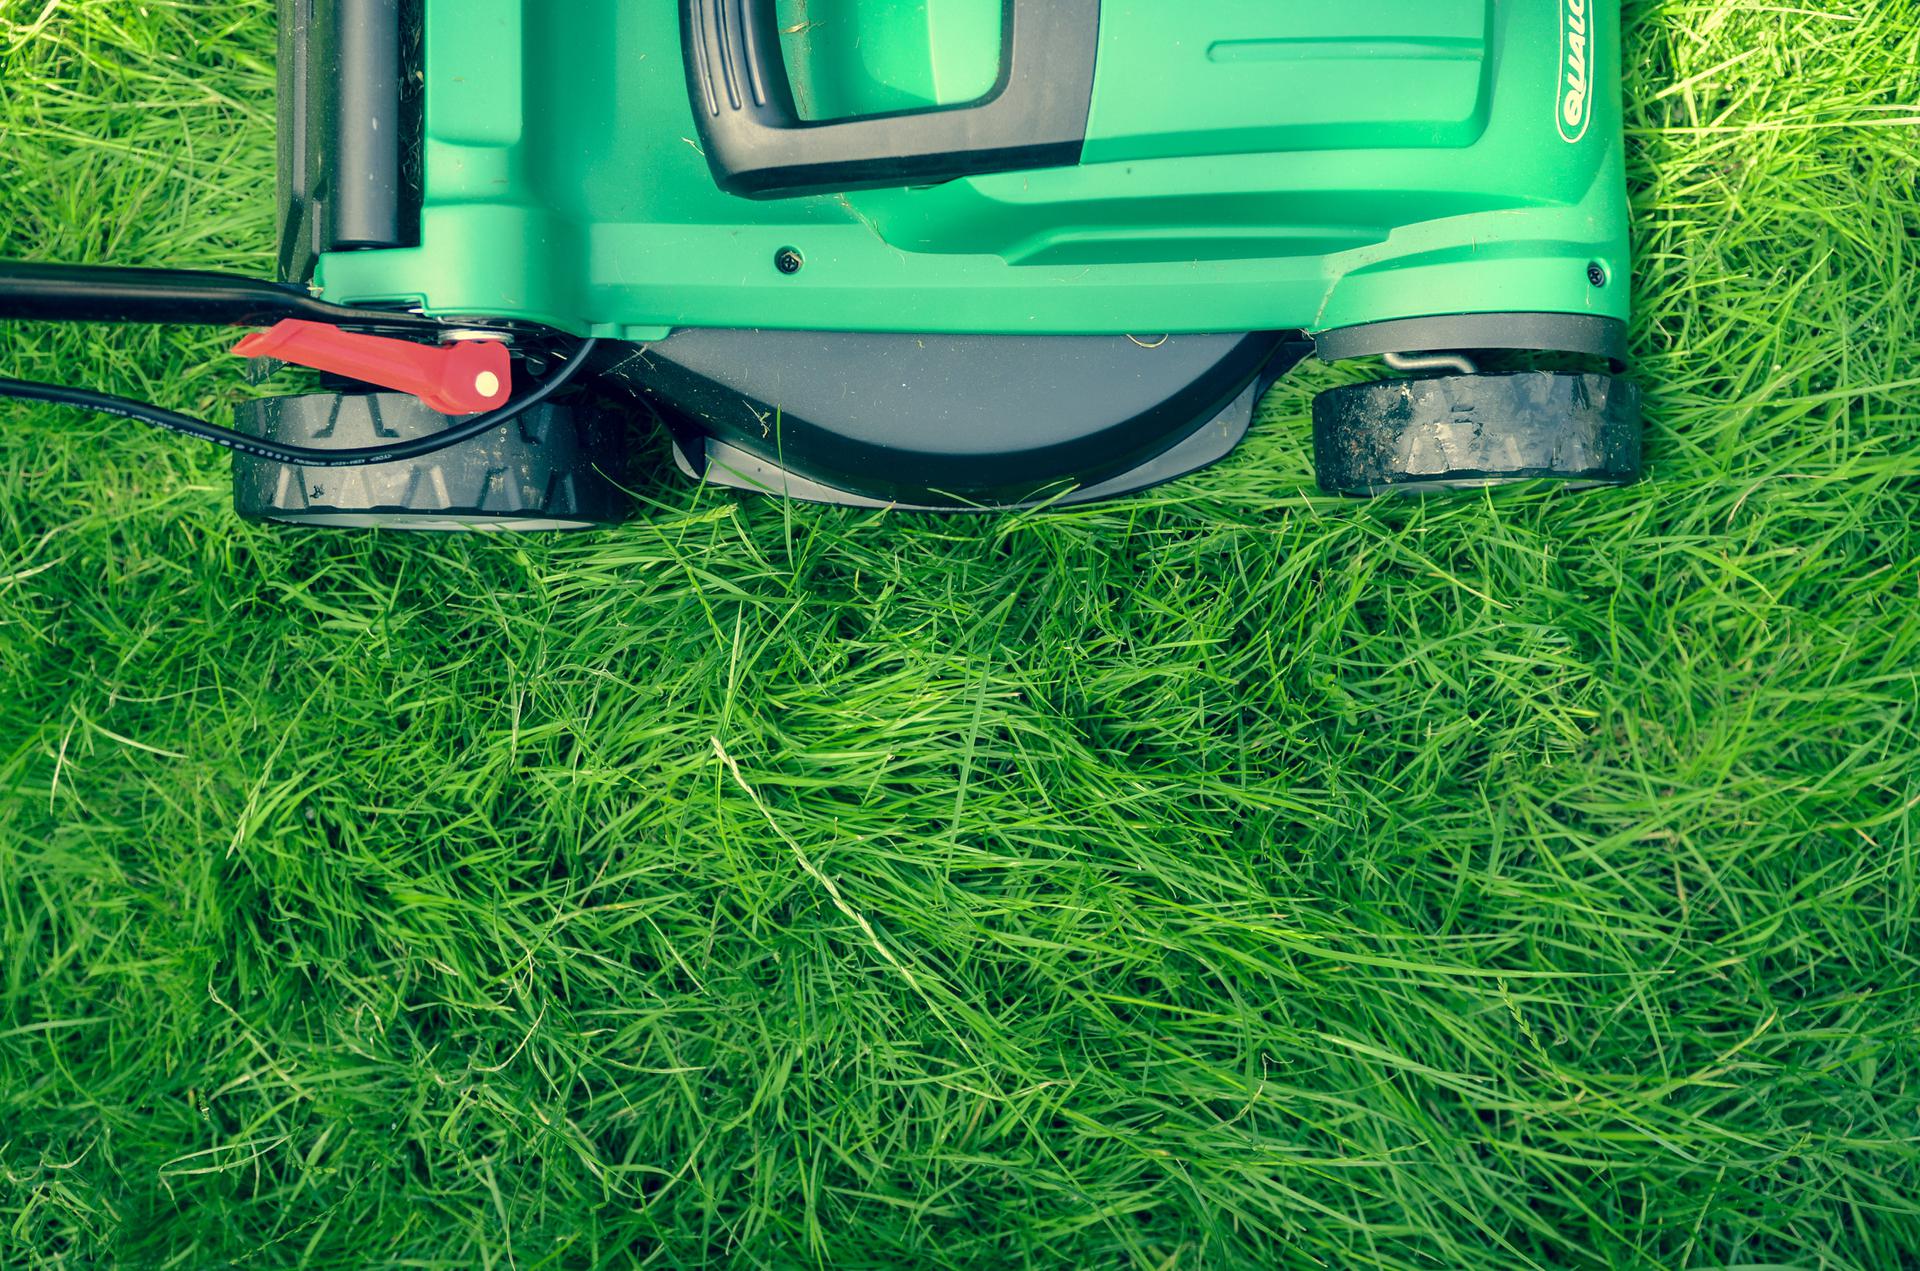 Chesapeake Homes It’s Time to Get Your Lawn Care Game On!